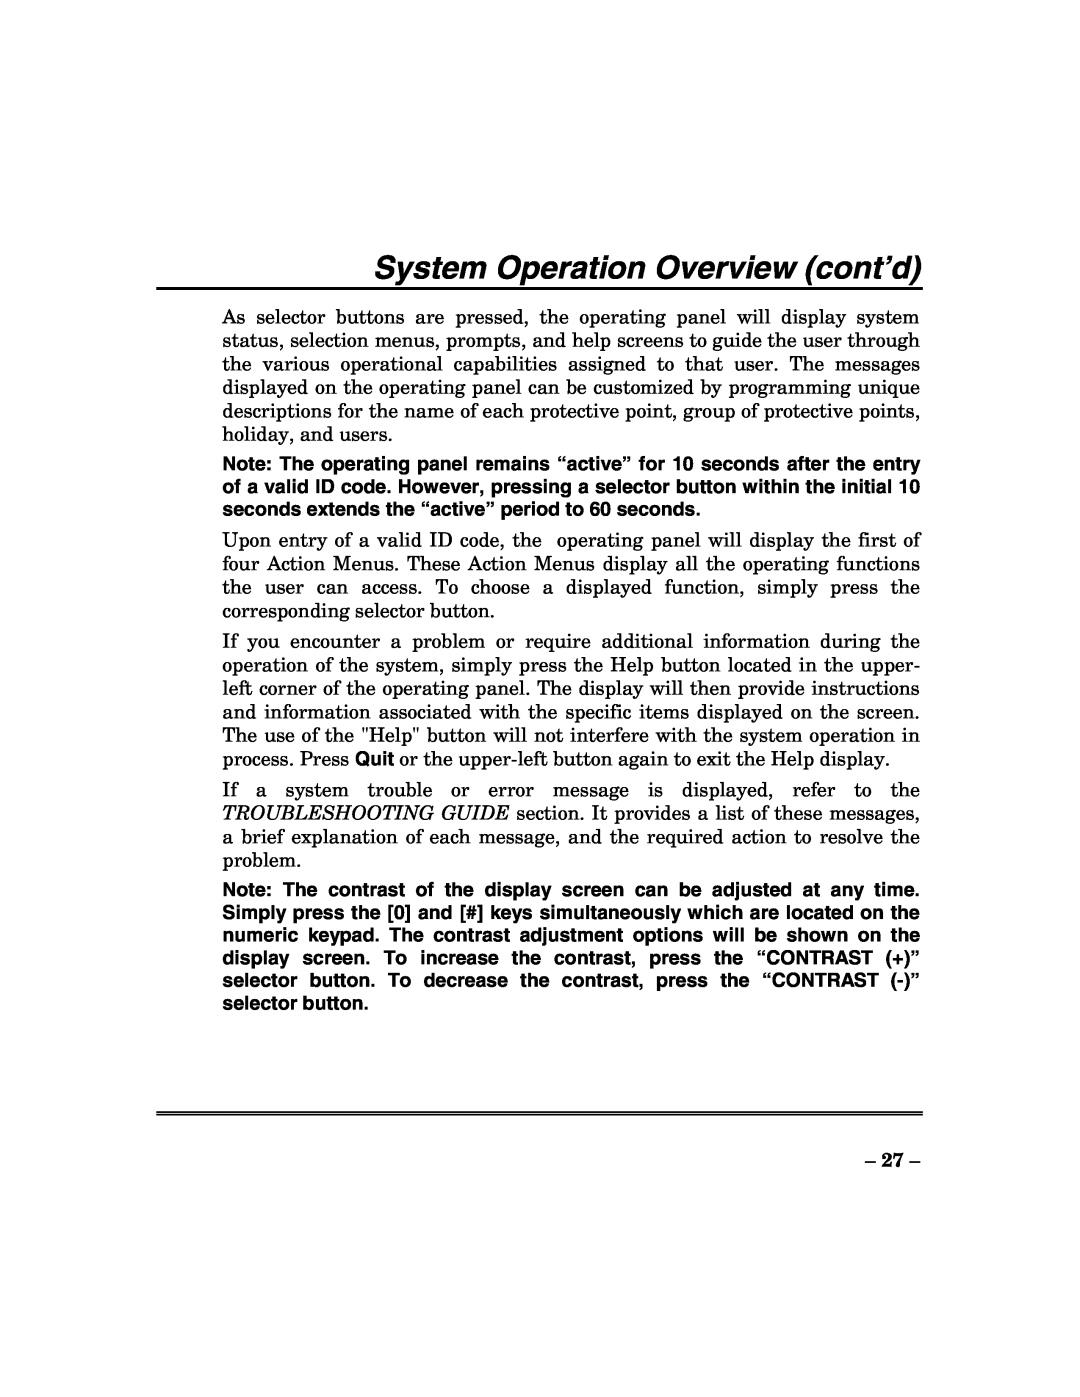 ADT Security Services 200 Plus manual System Operation Overview cont’d 